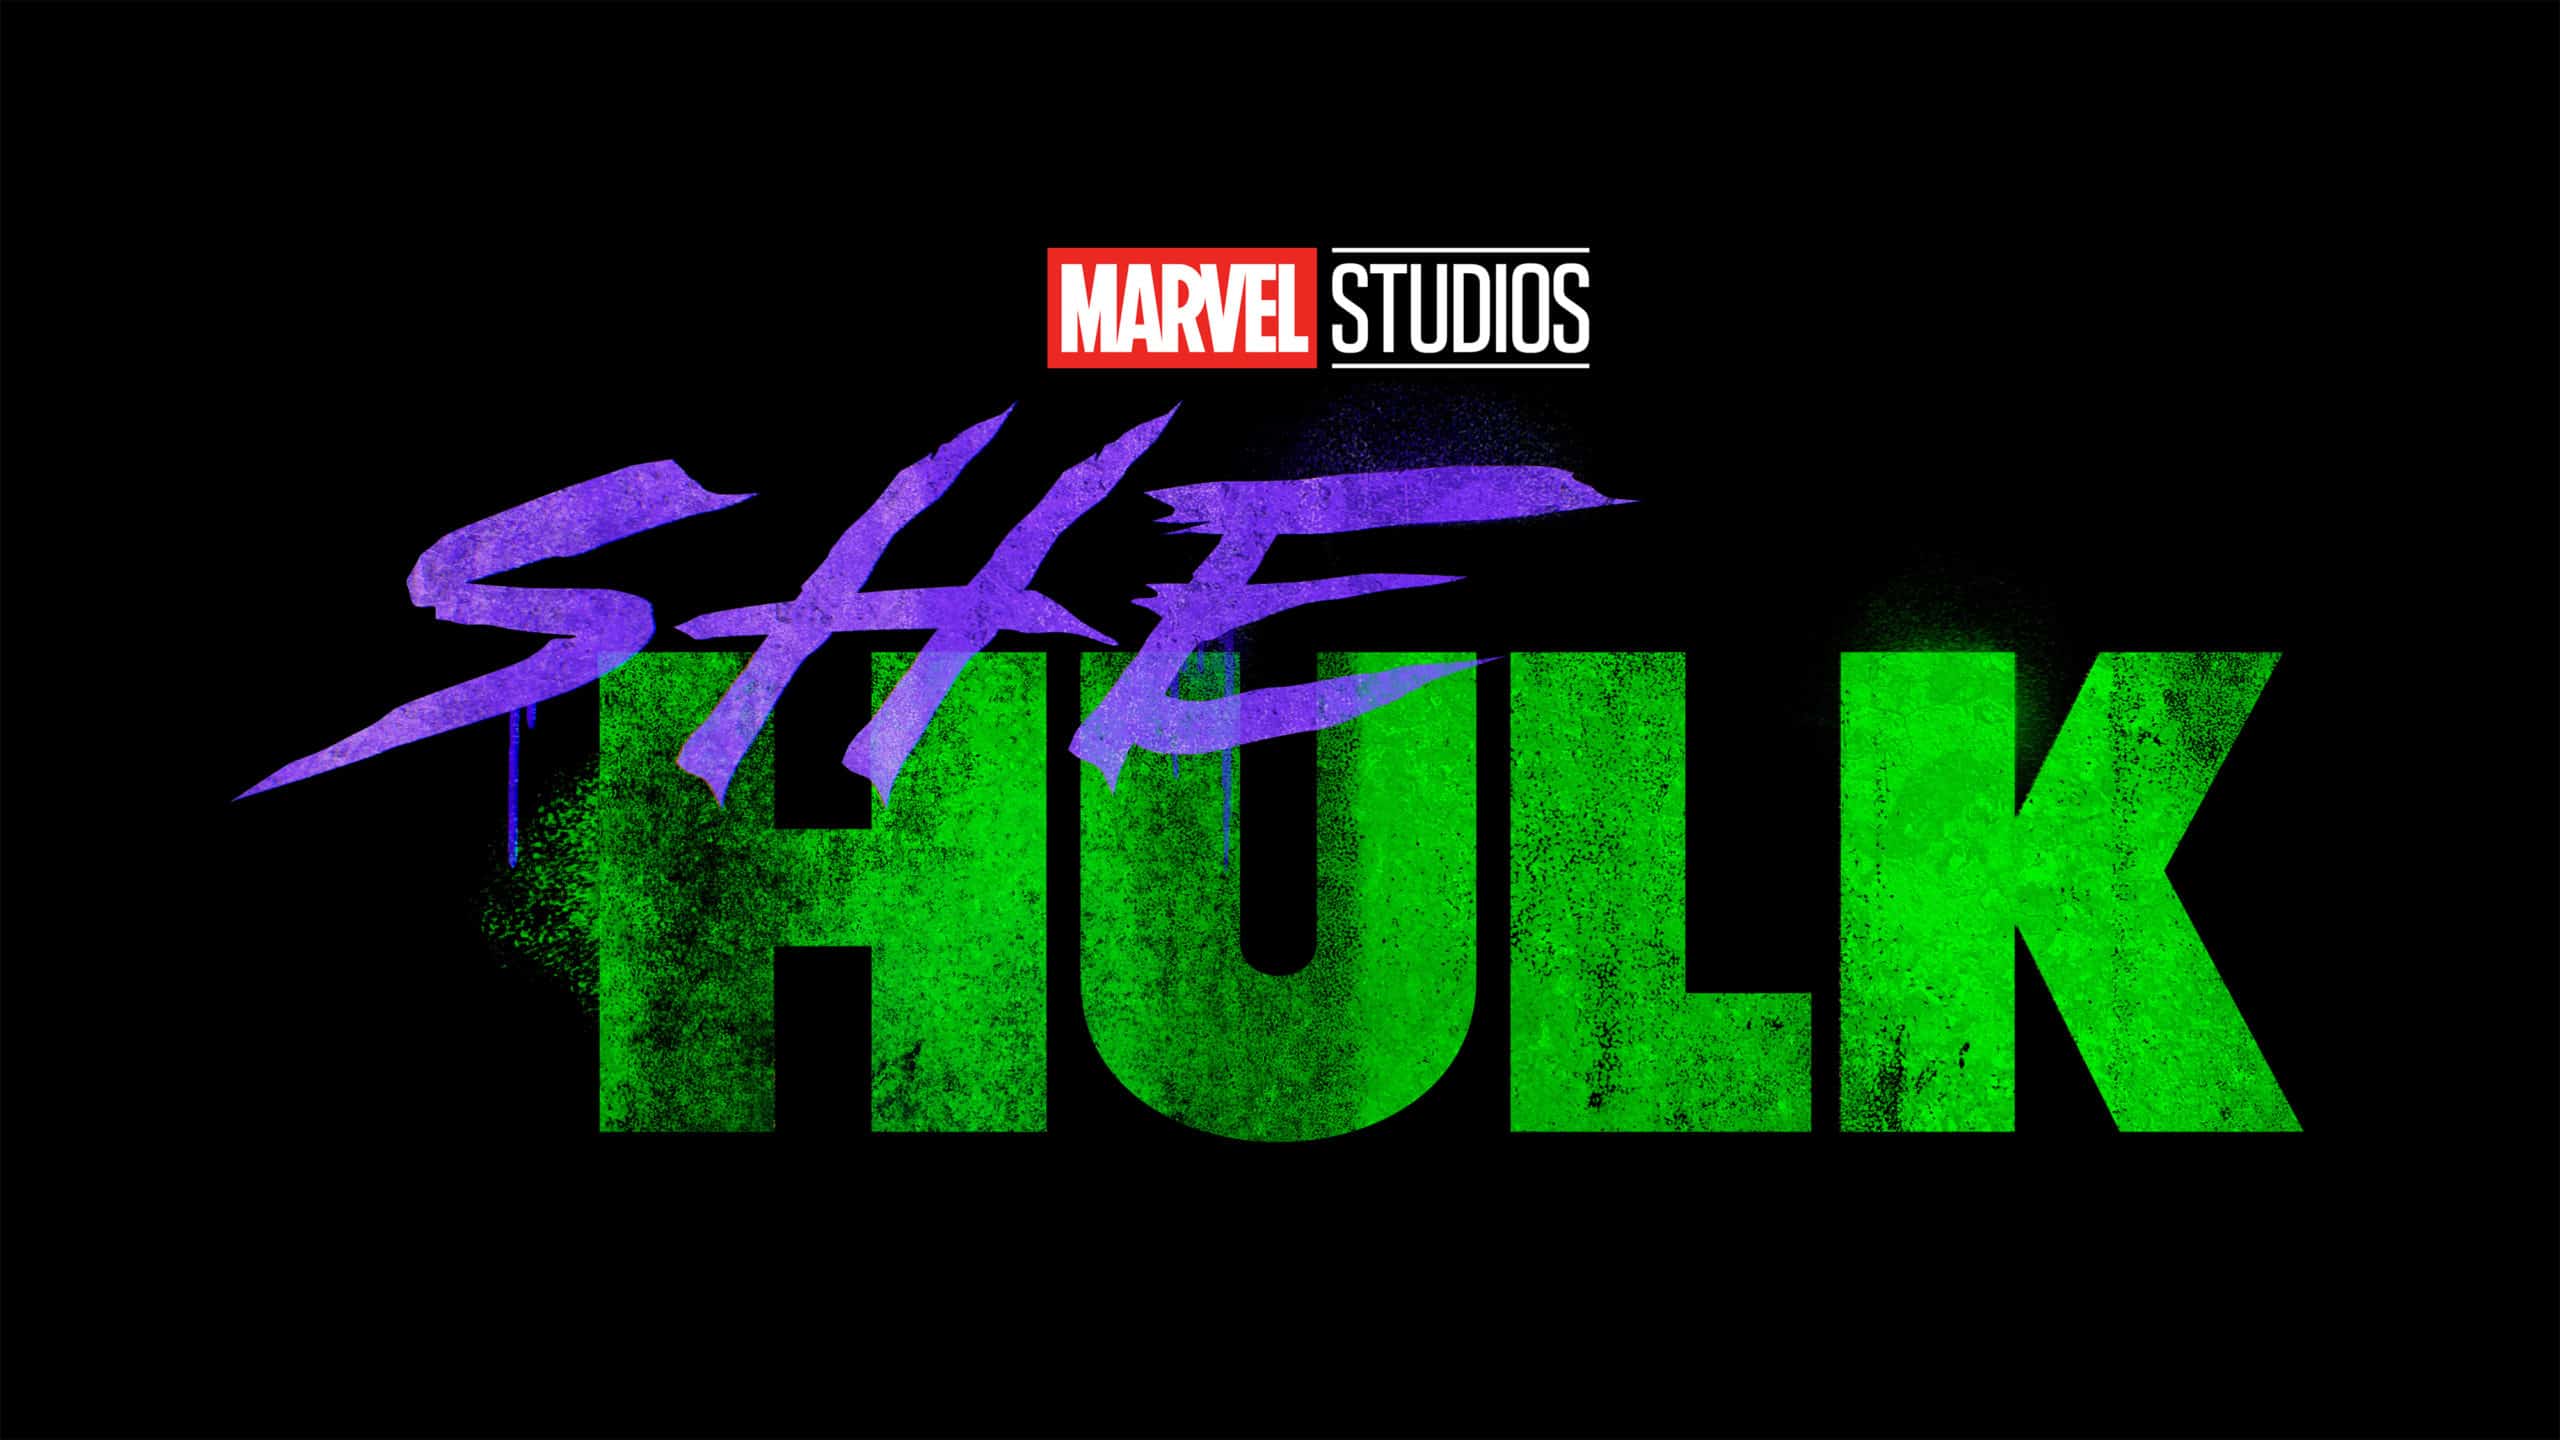 The Cast and Characters of Marvel’s “She Hulk” TV Show